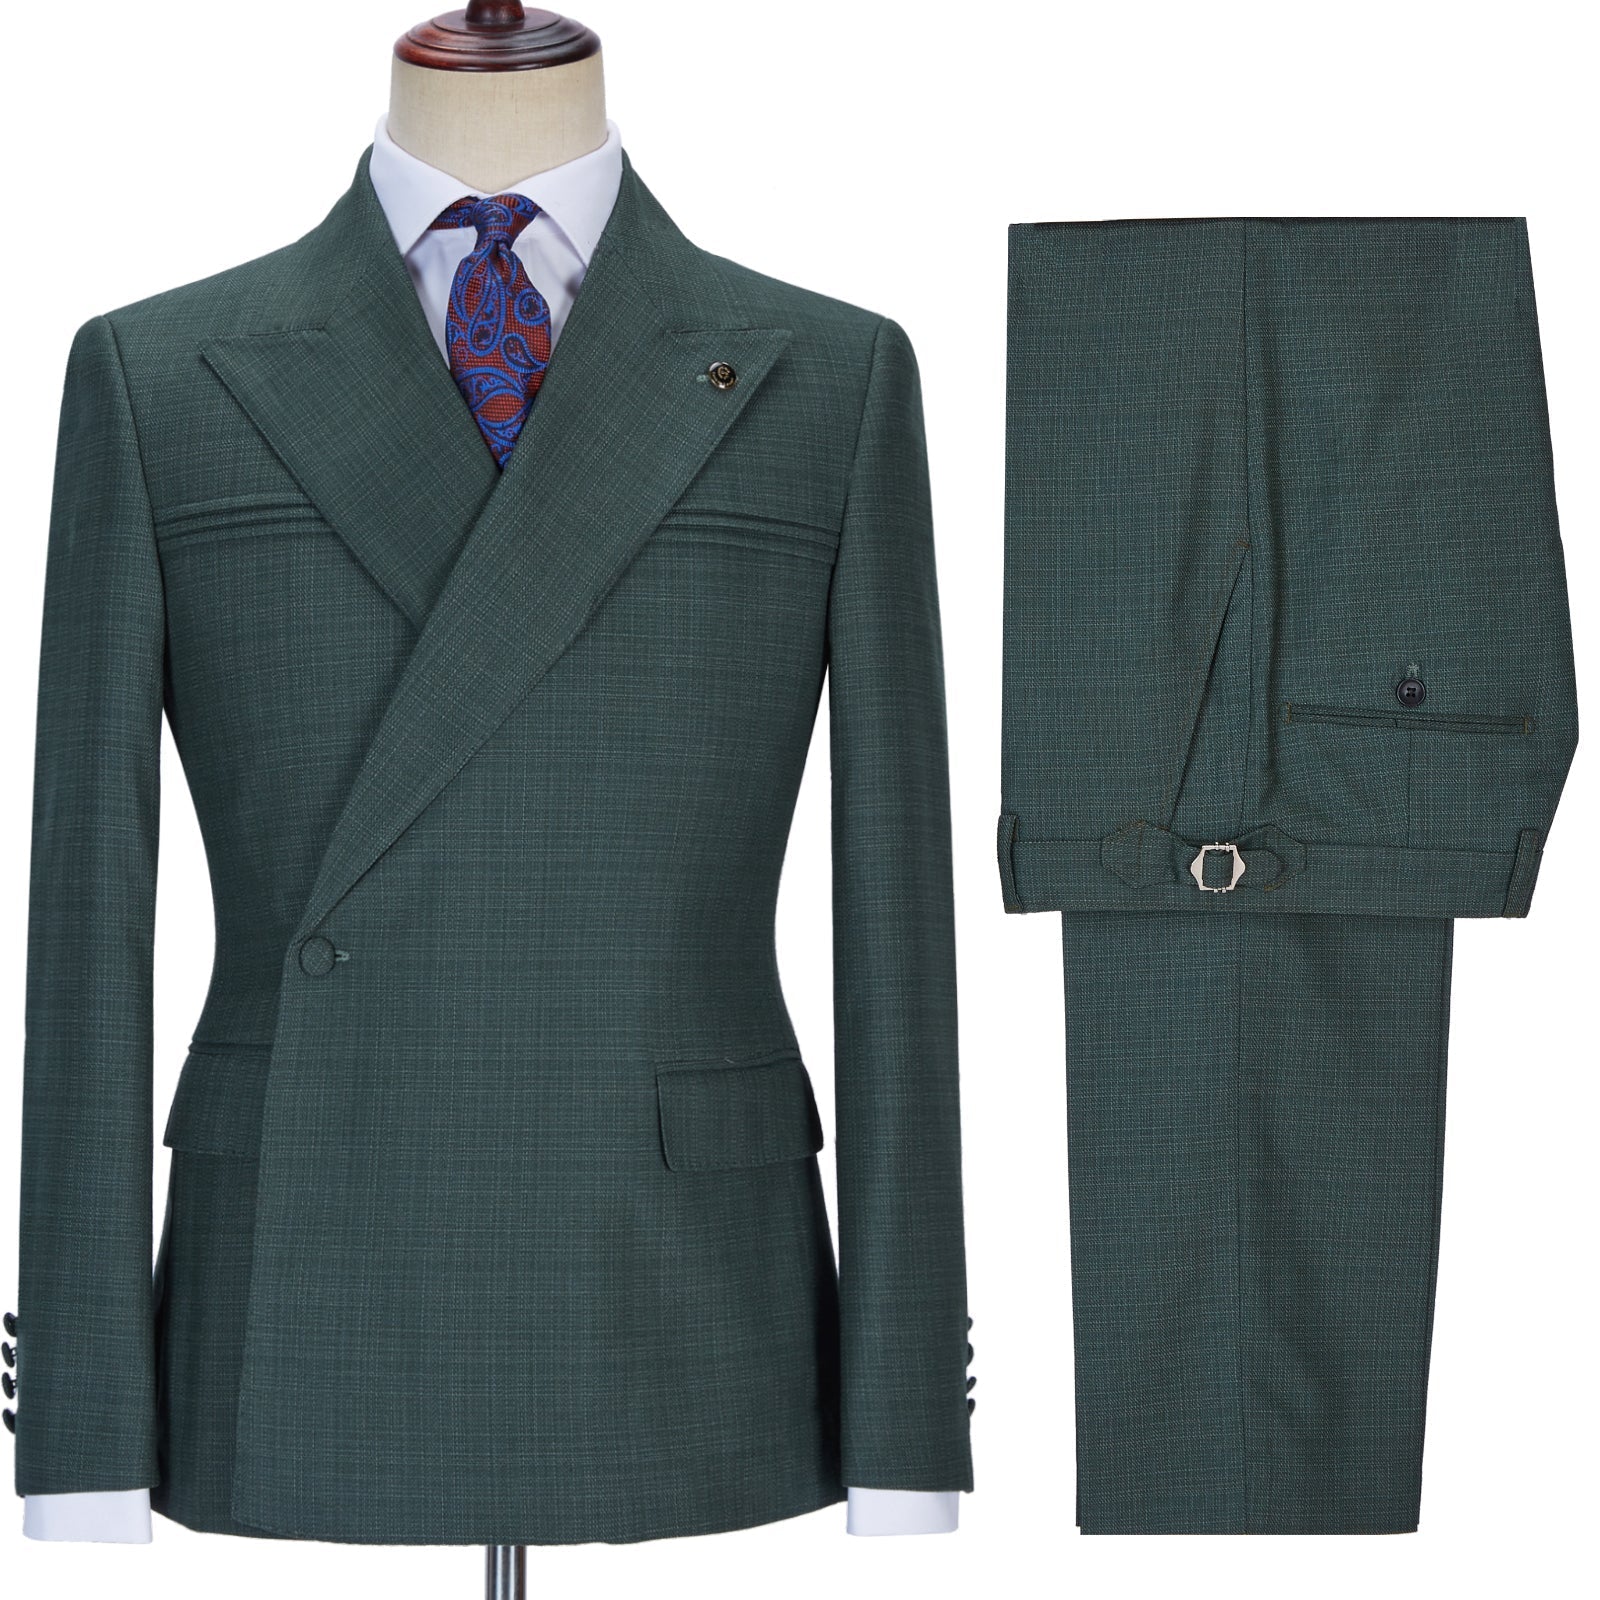 Glamorous Dark Green Peaked Lapel Wedding Suit with Ruffles-Prom Suits-BallBride